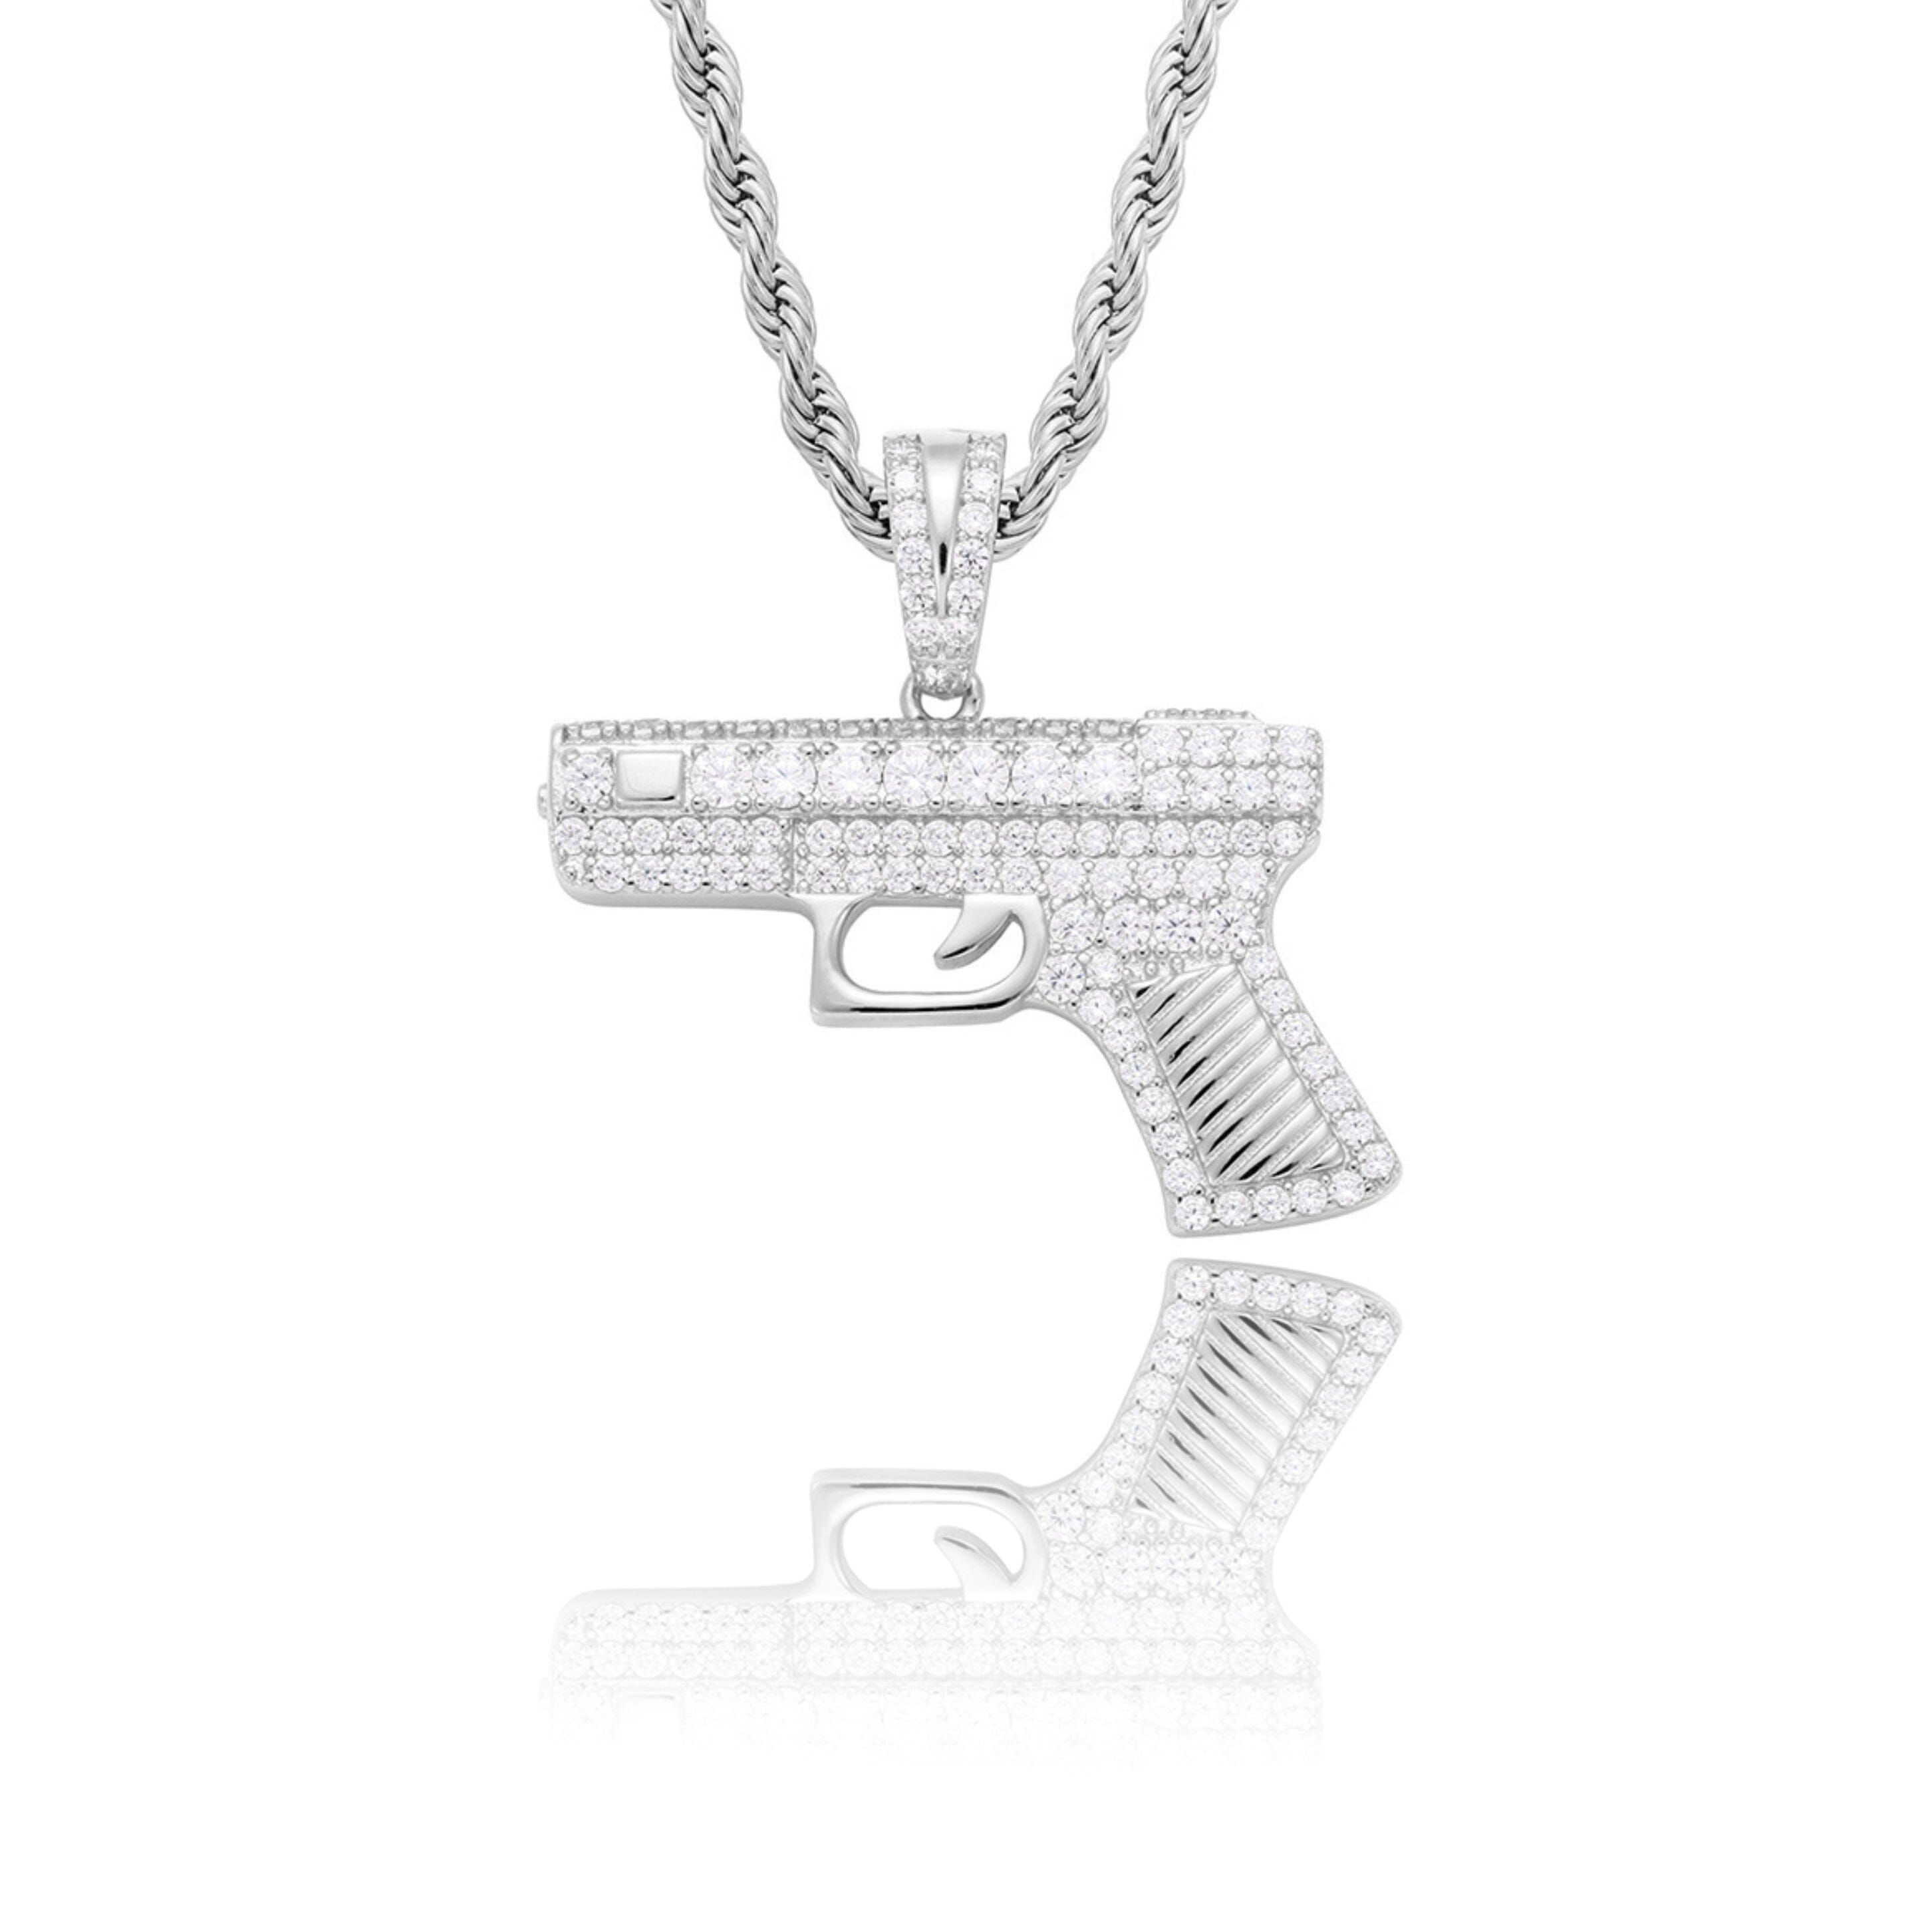 YOUNG. WILD. FREE. - Glcok Handgun Pendant - 1.5inch Charms & Pendants Brass with CZ Stone Free Rope Chain White Gold